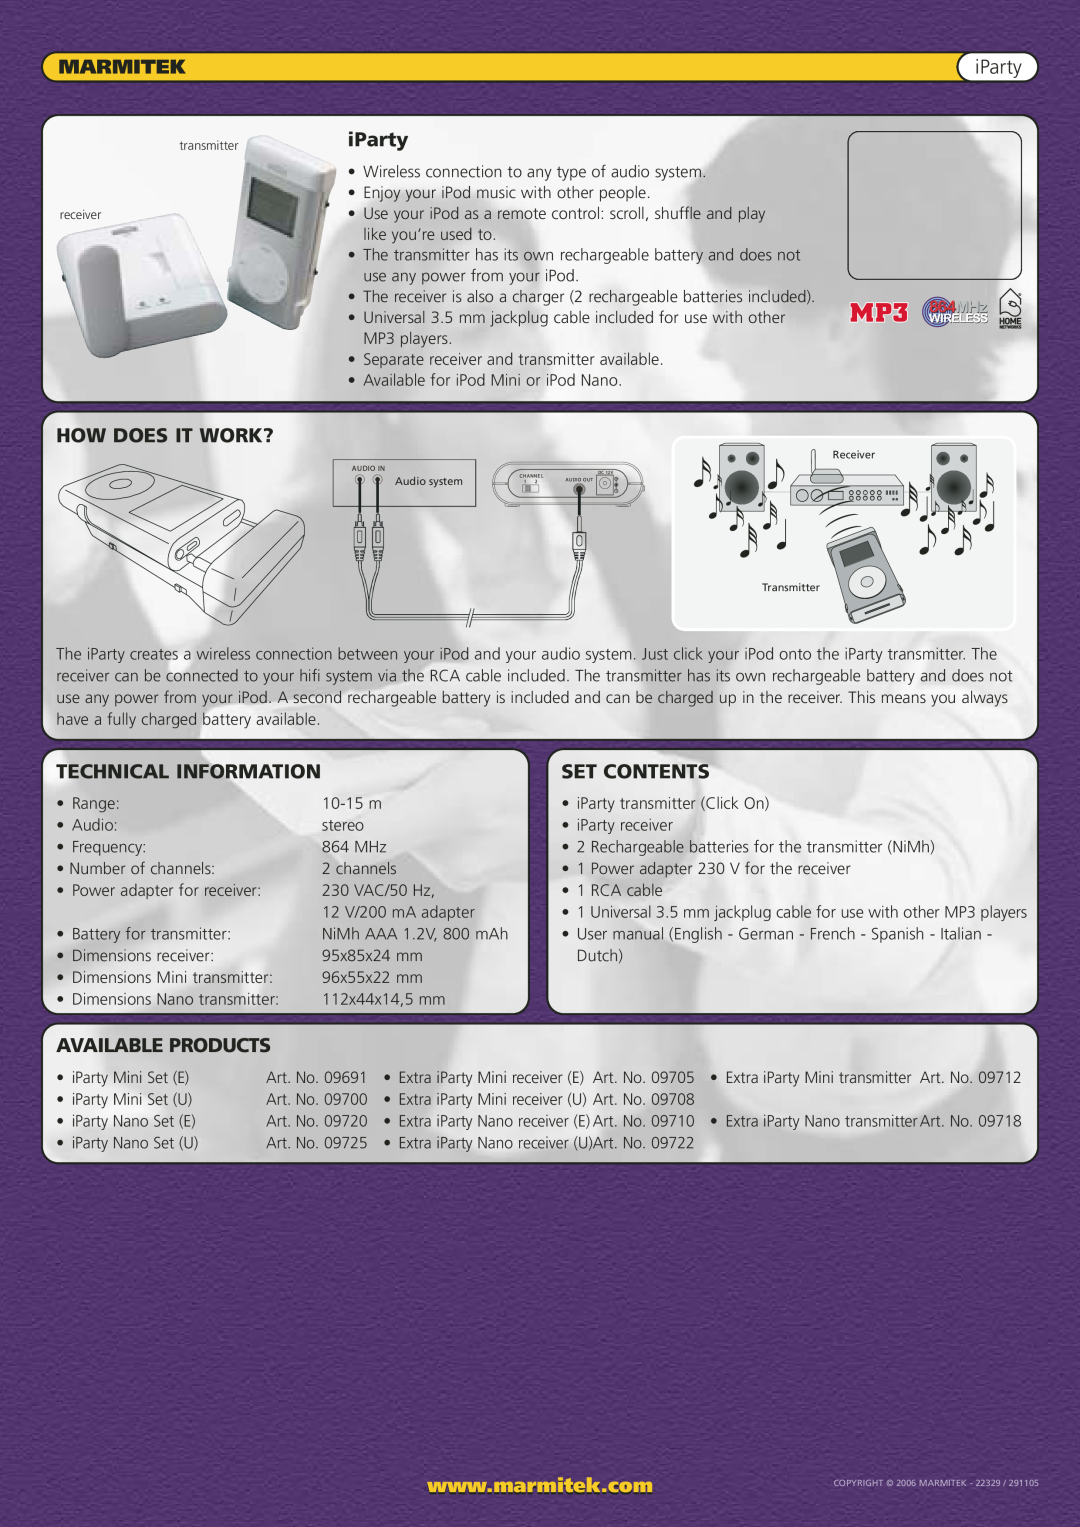 Marmitek iParty manual Marmitek, How Does It Work?, Set Contents, Available Products, Technical Information 